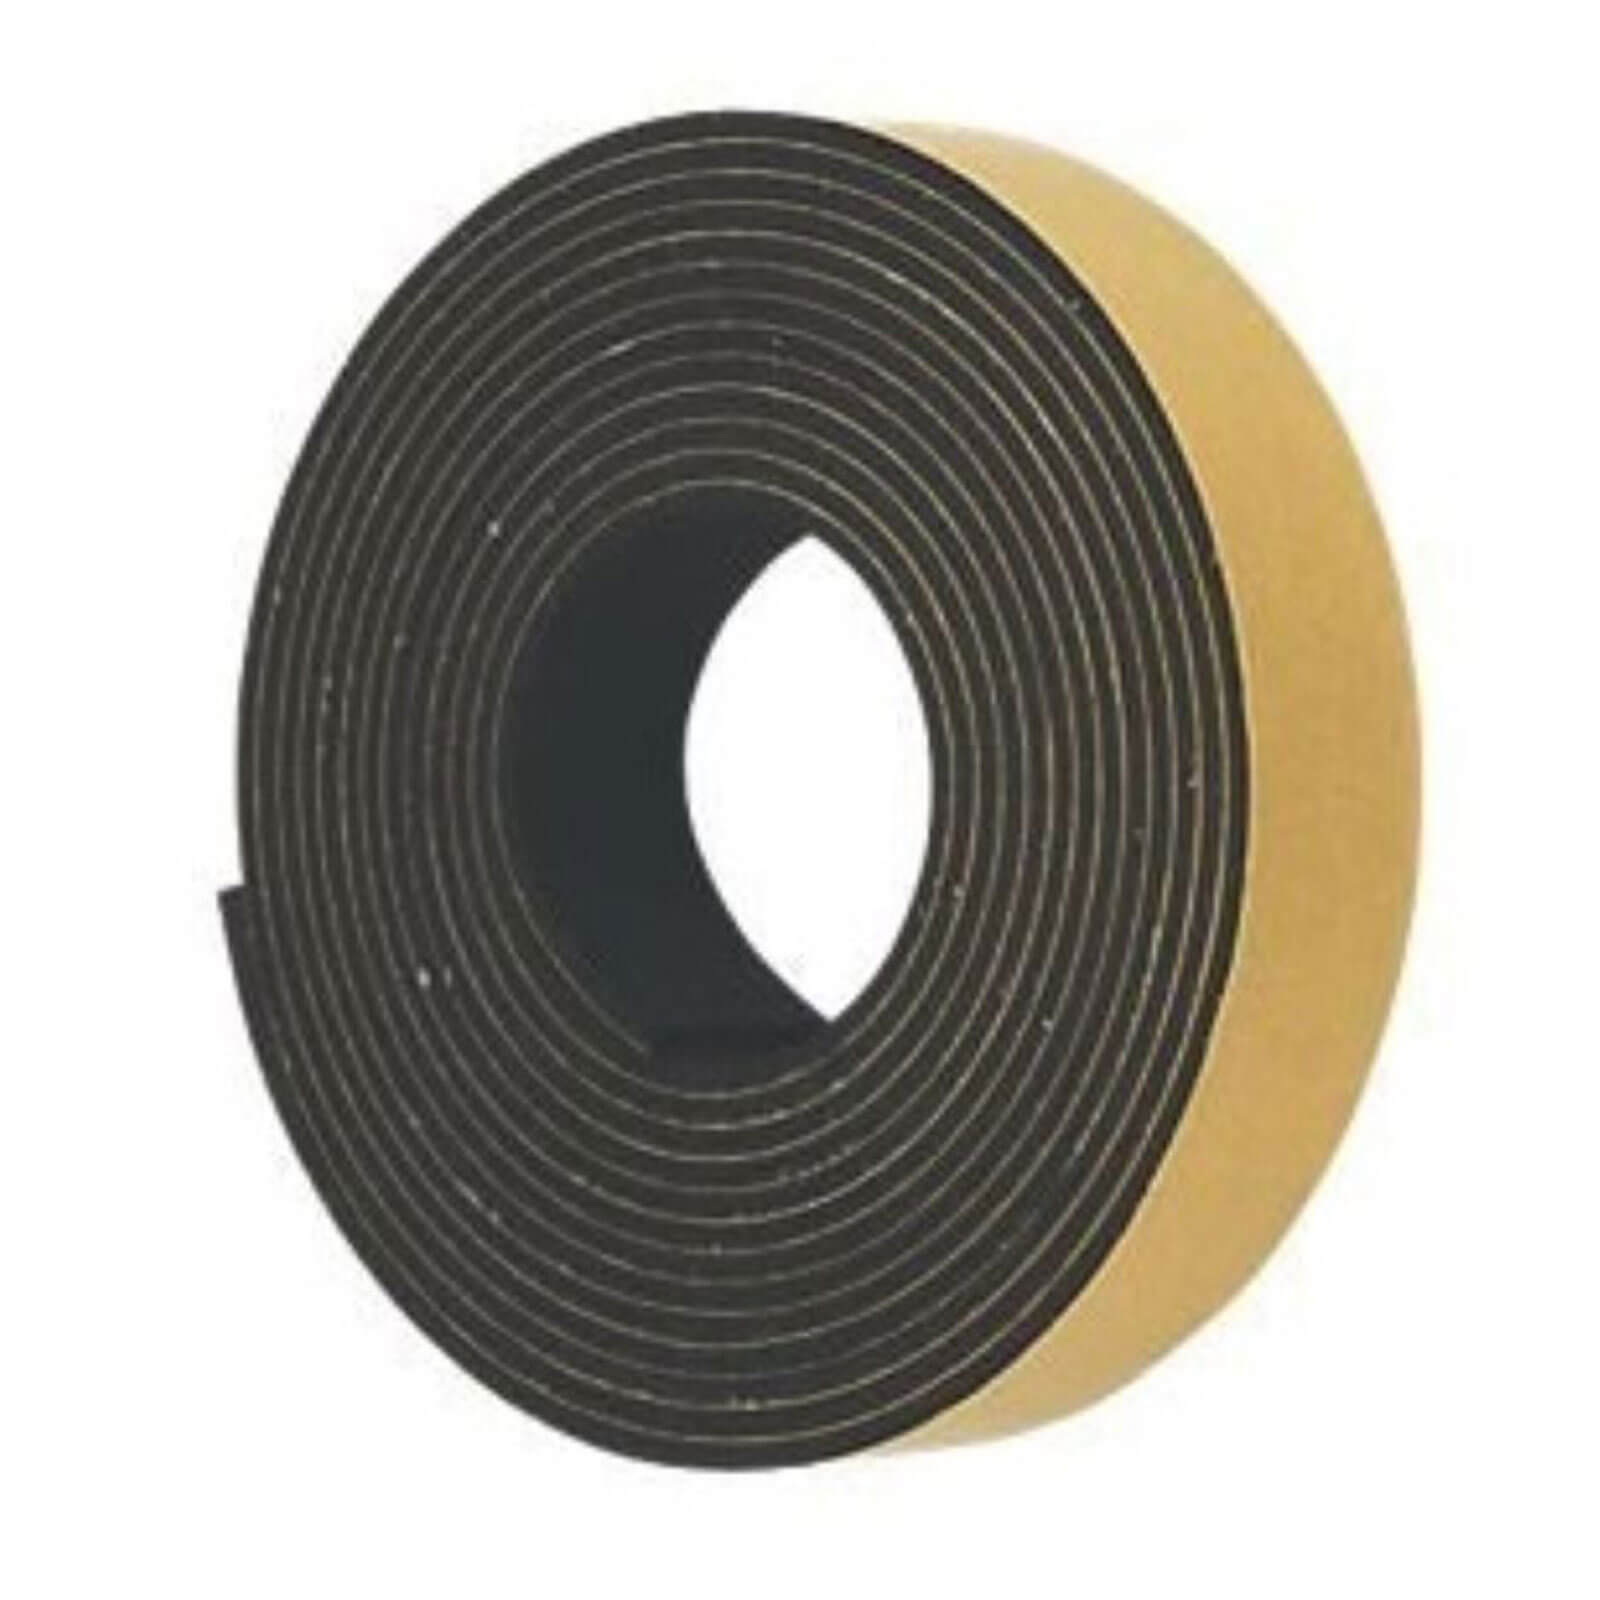 DeWalt Replacement High Friction Strip for Plunge Saw Guide Rails